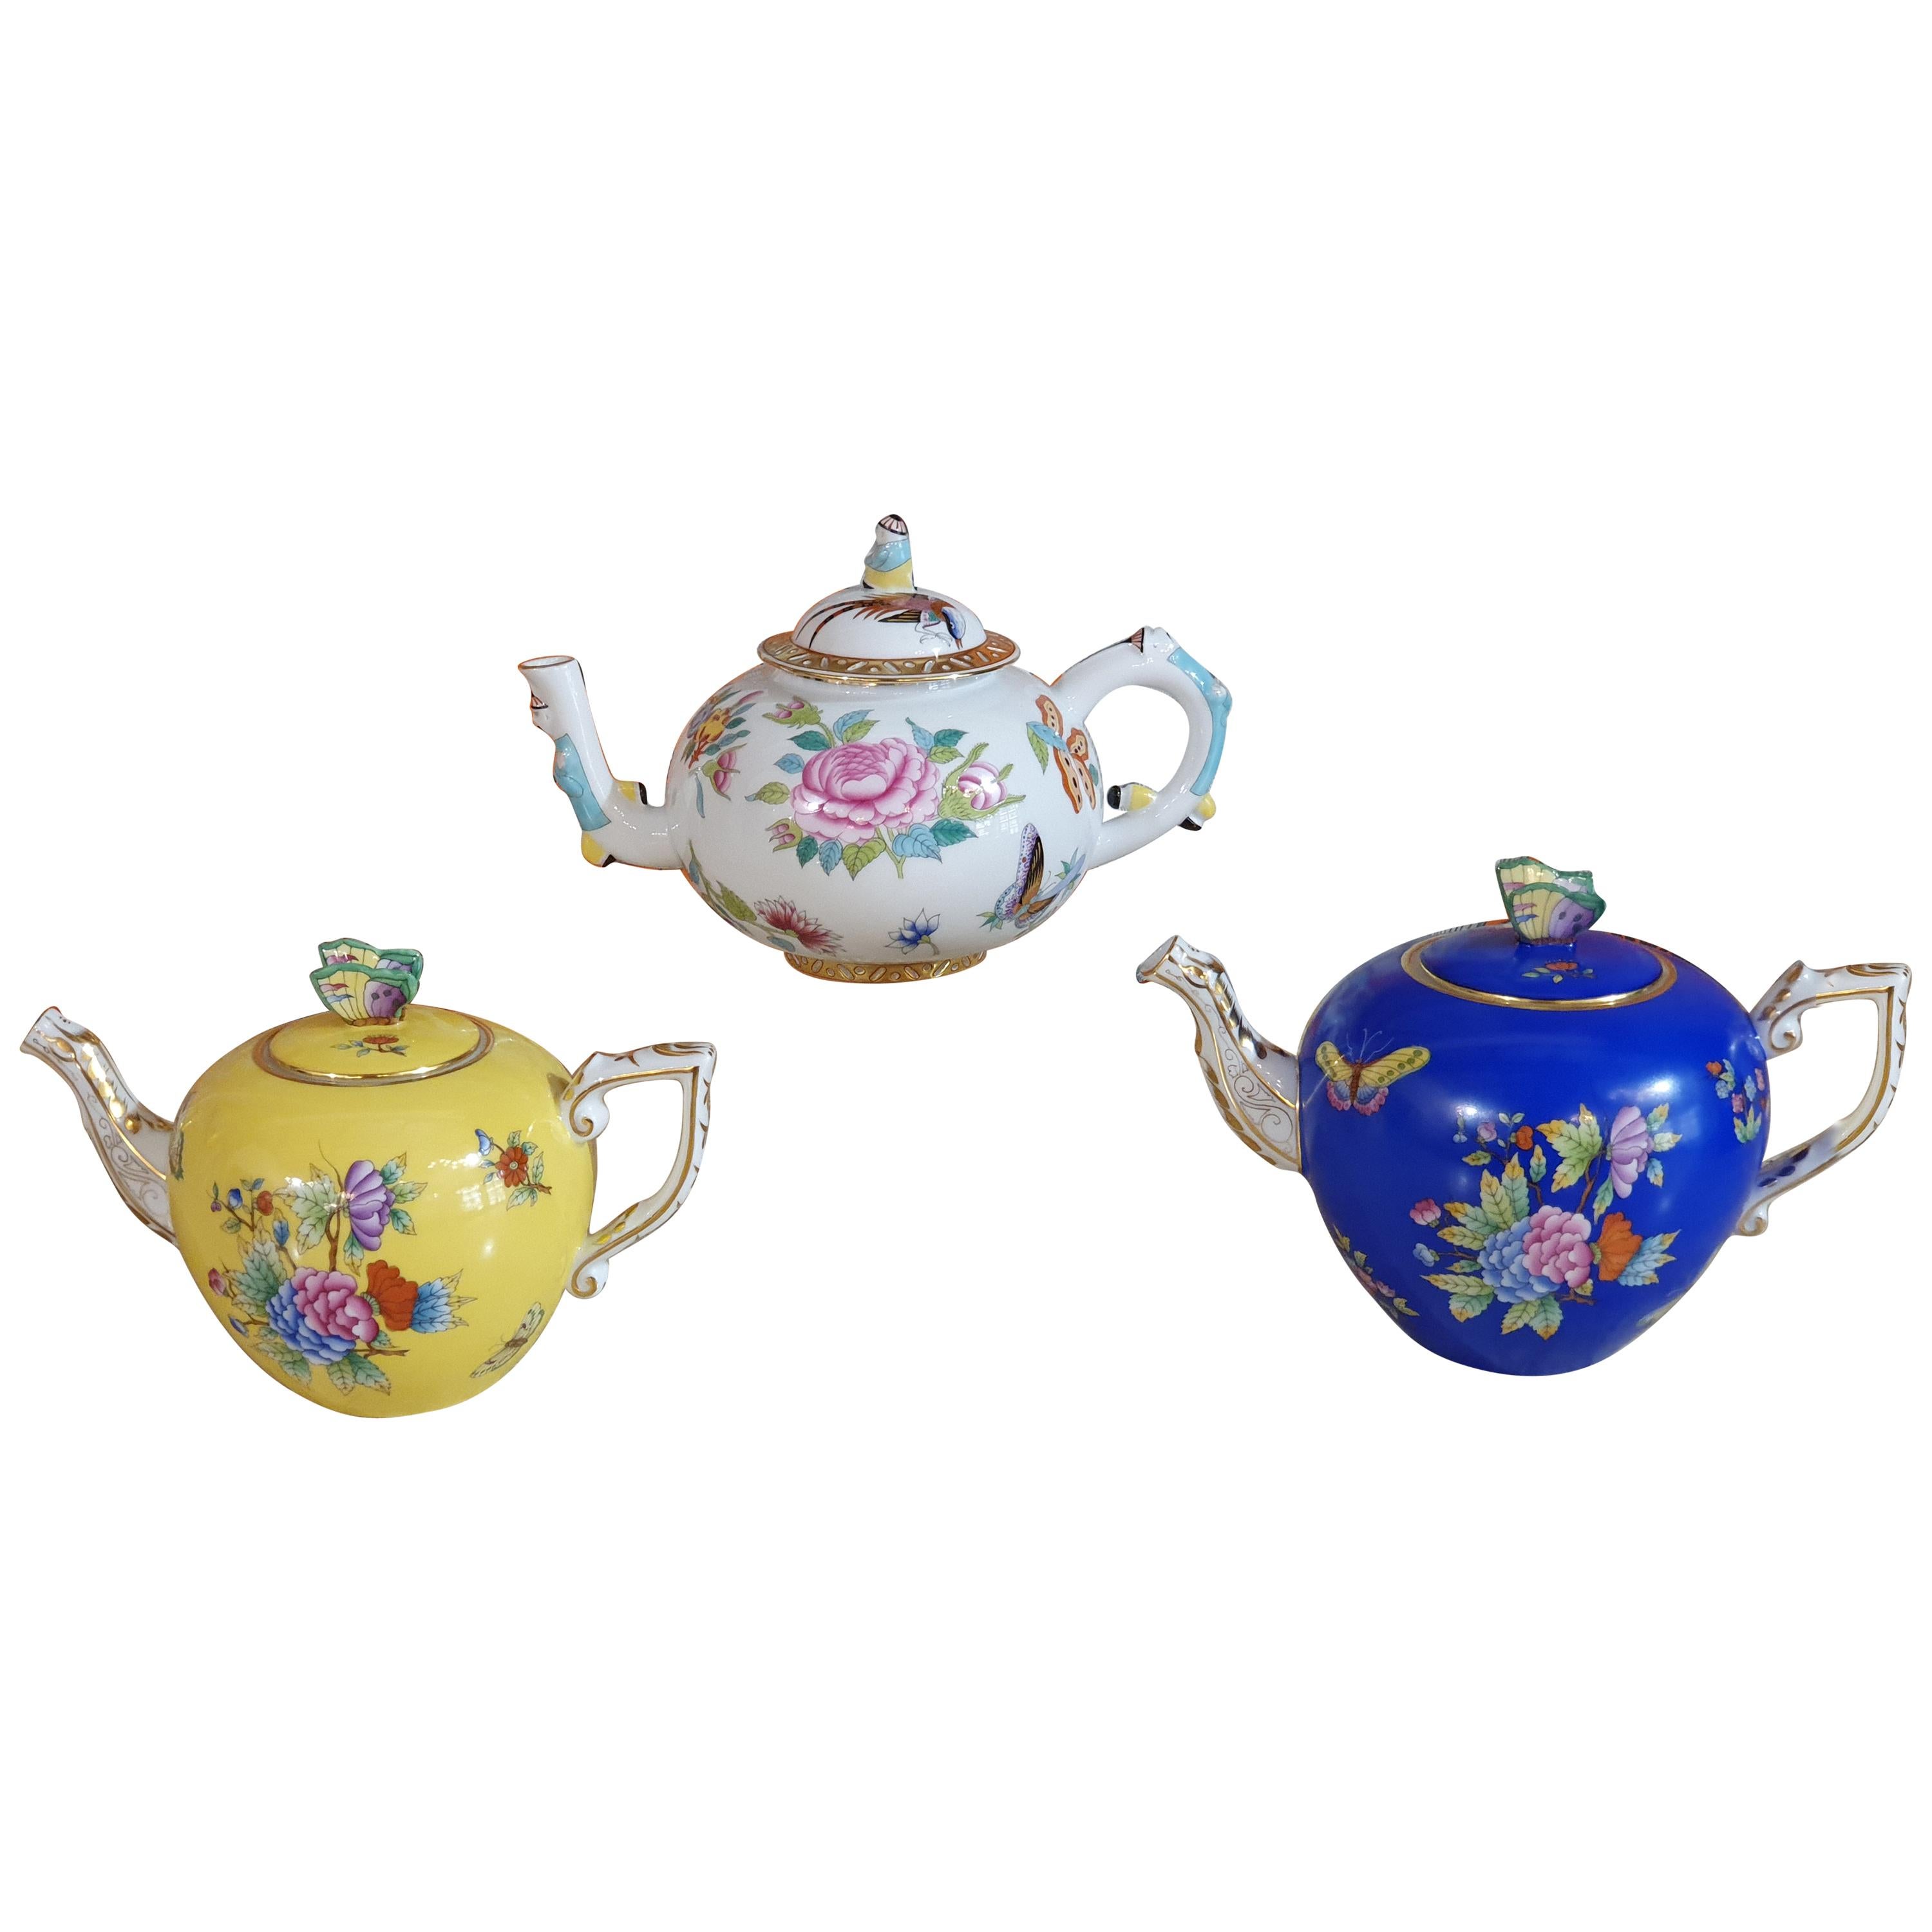 Herend Hand Painted Polycrome Porcelain Set of Three Teapot, Hungary, Modern